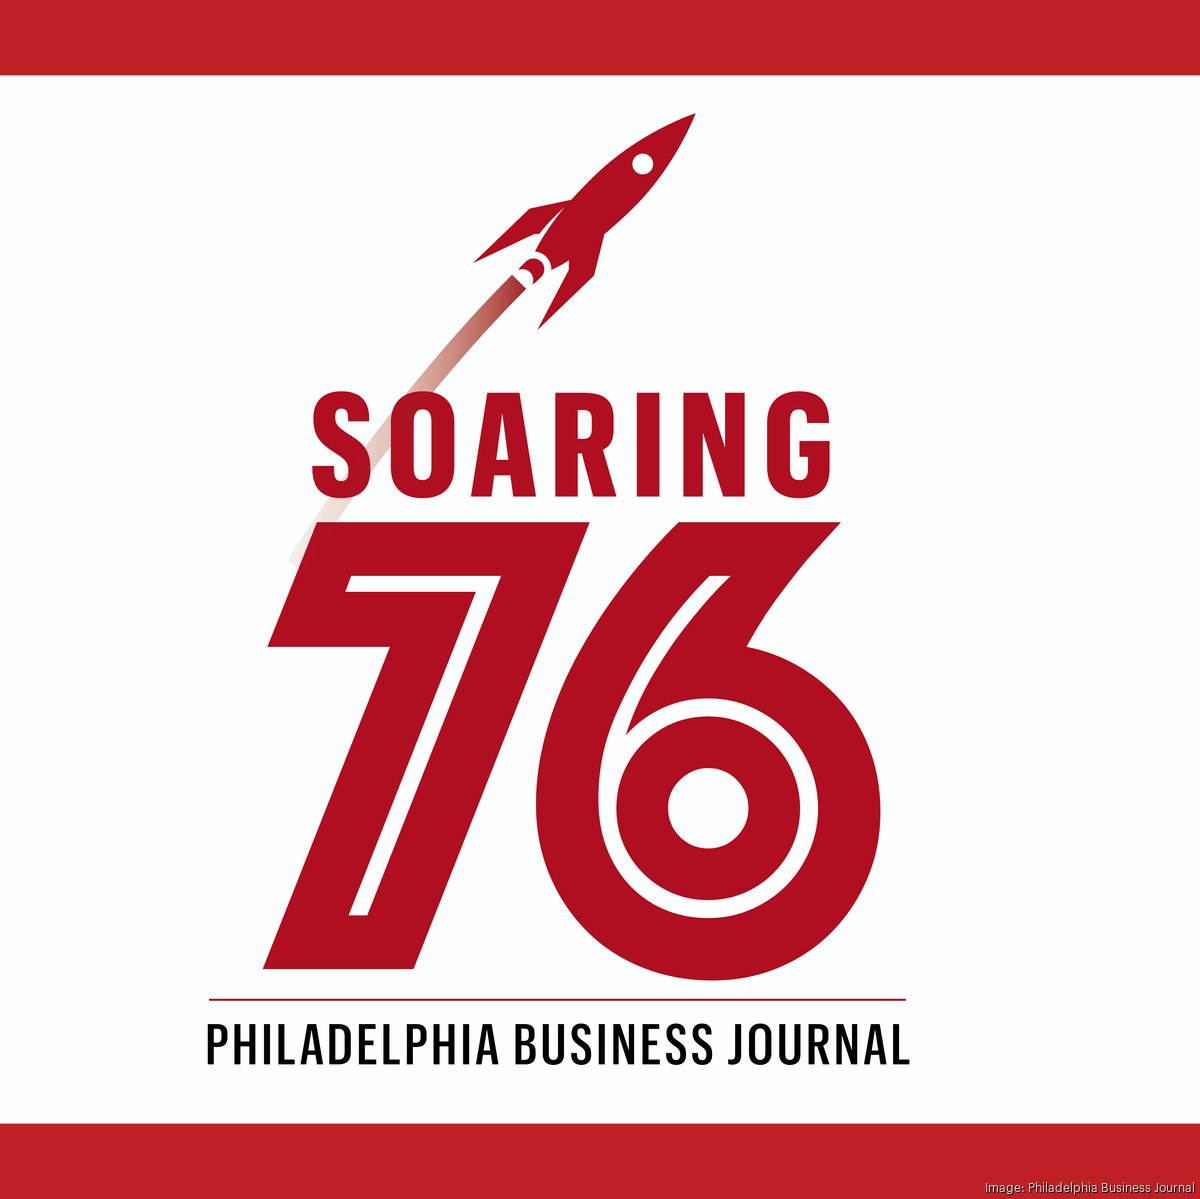 Benchmark Construction Group Listed on PBJ's Soaring 76 Companies